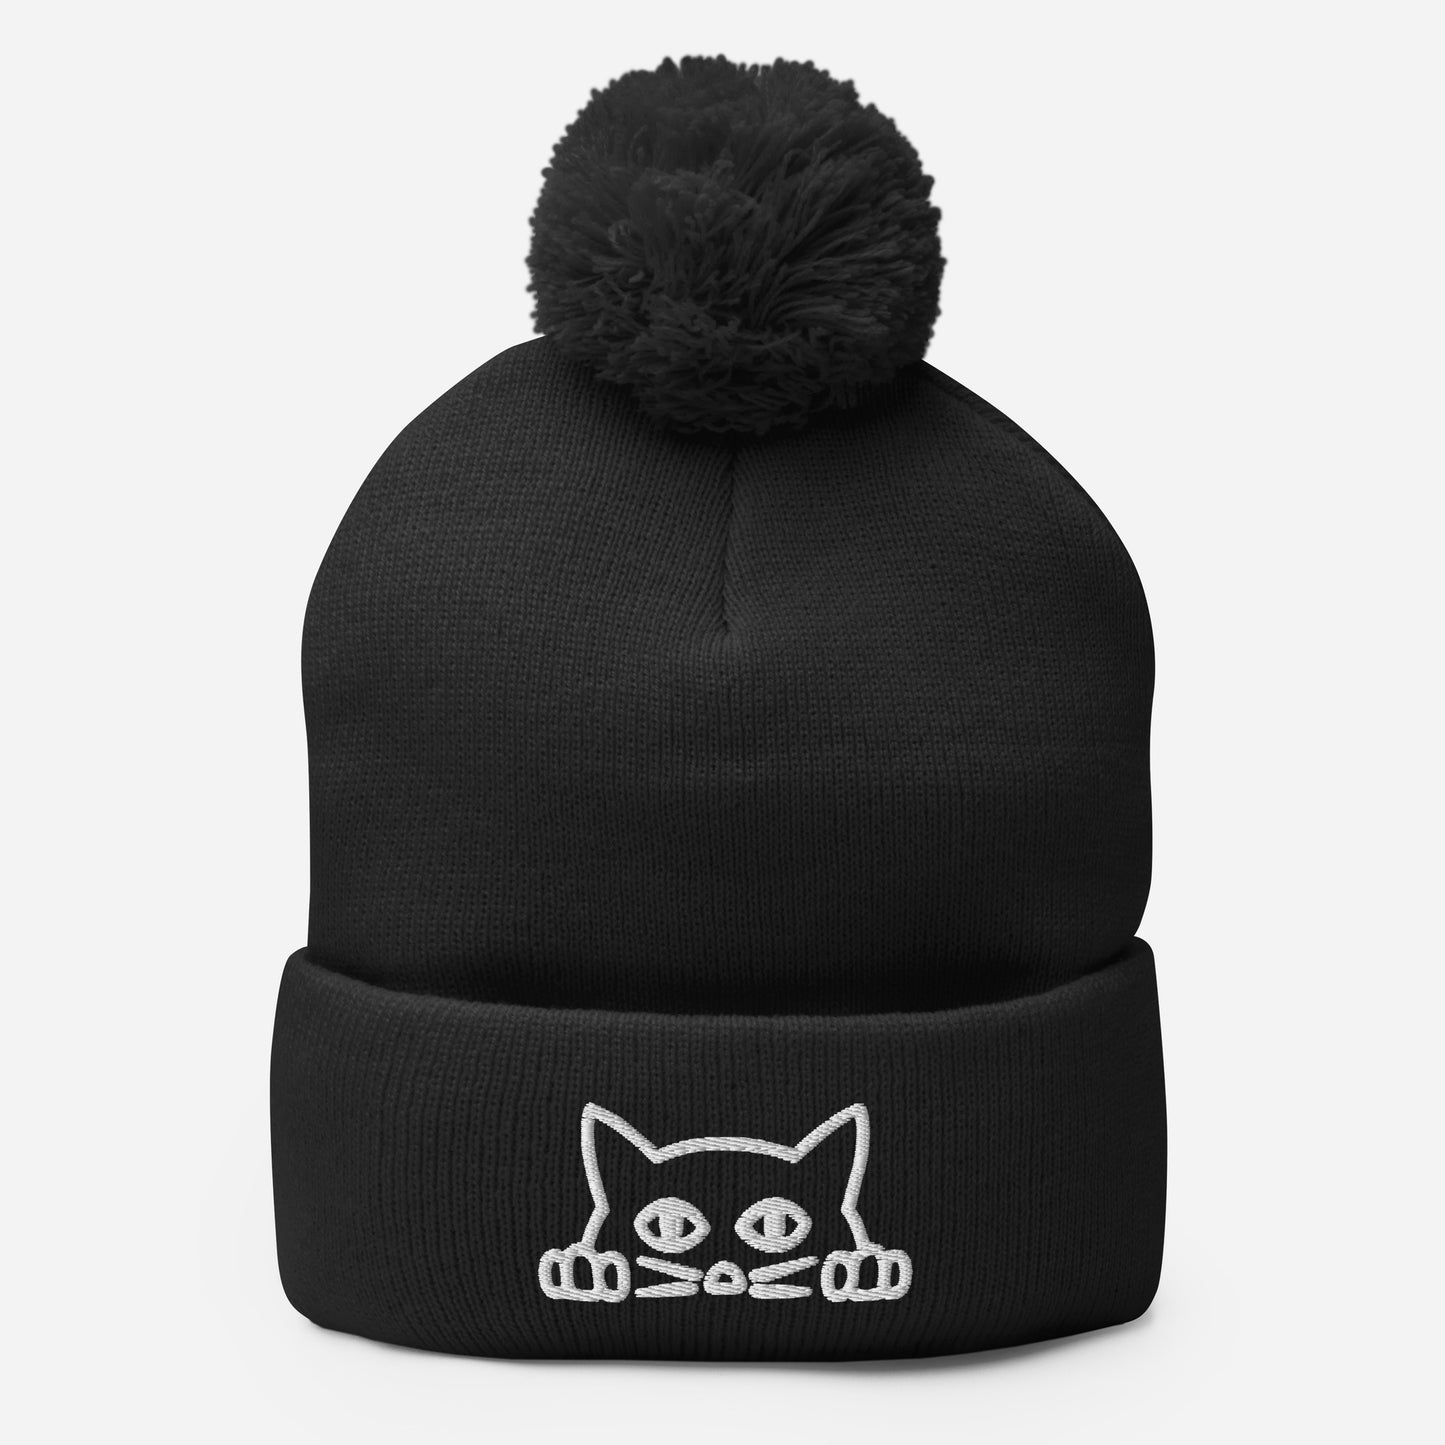 Embroidered hat with kitten pompom